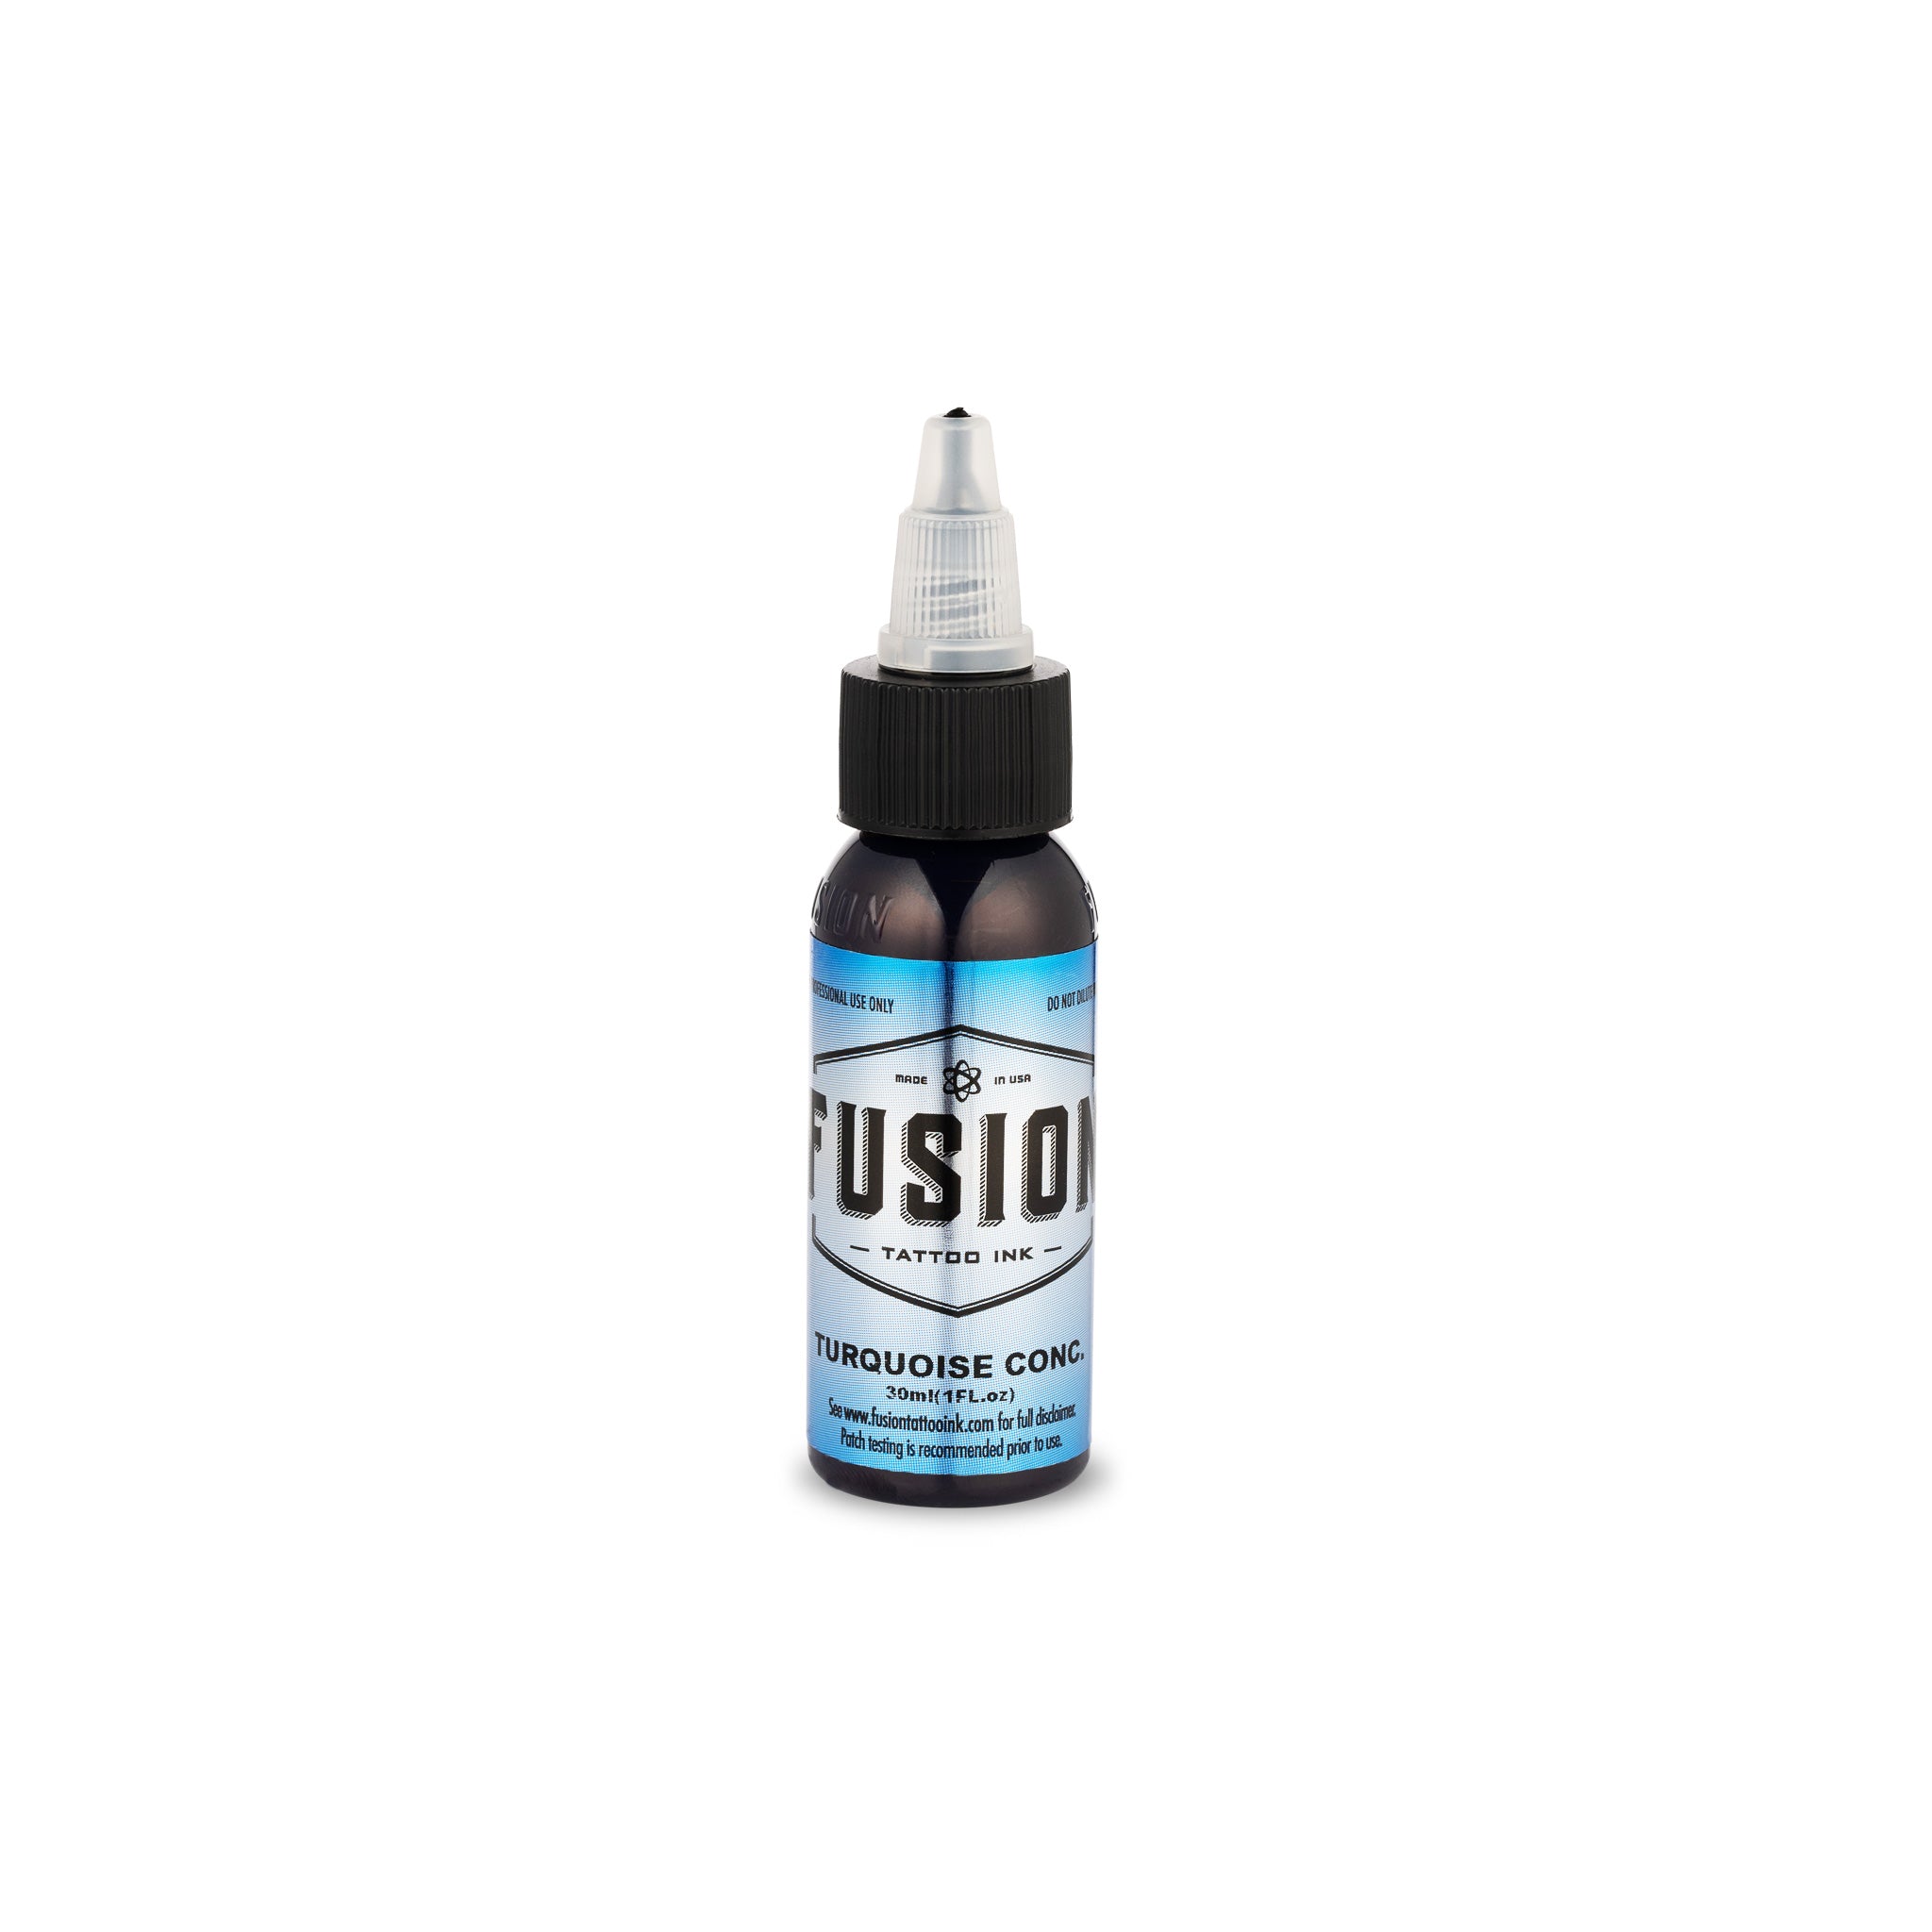 Fusion Turquoise Concentrate Tattoo Ink 1 oz.